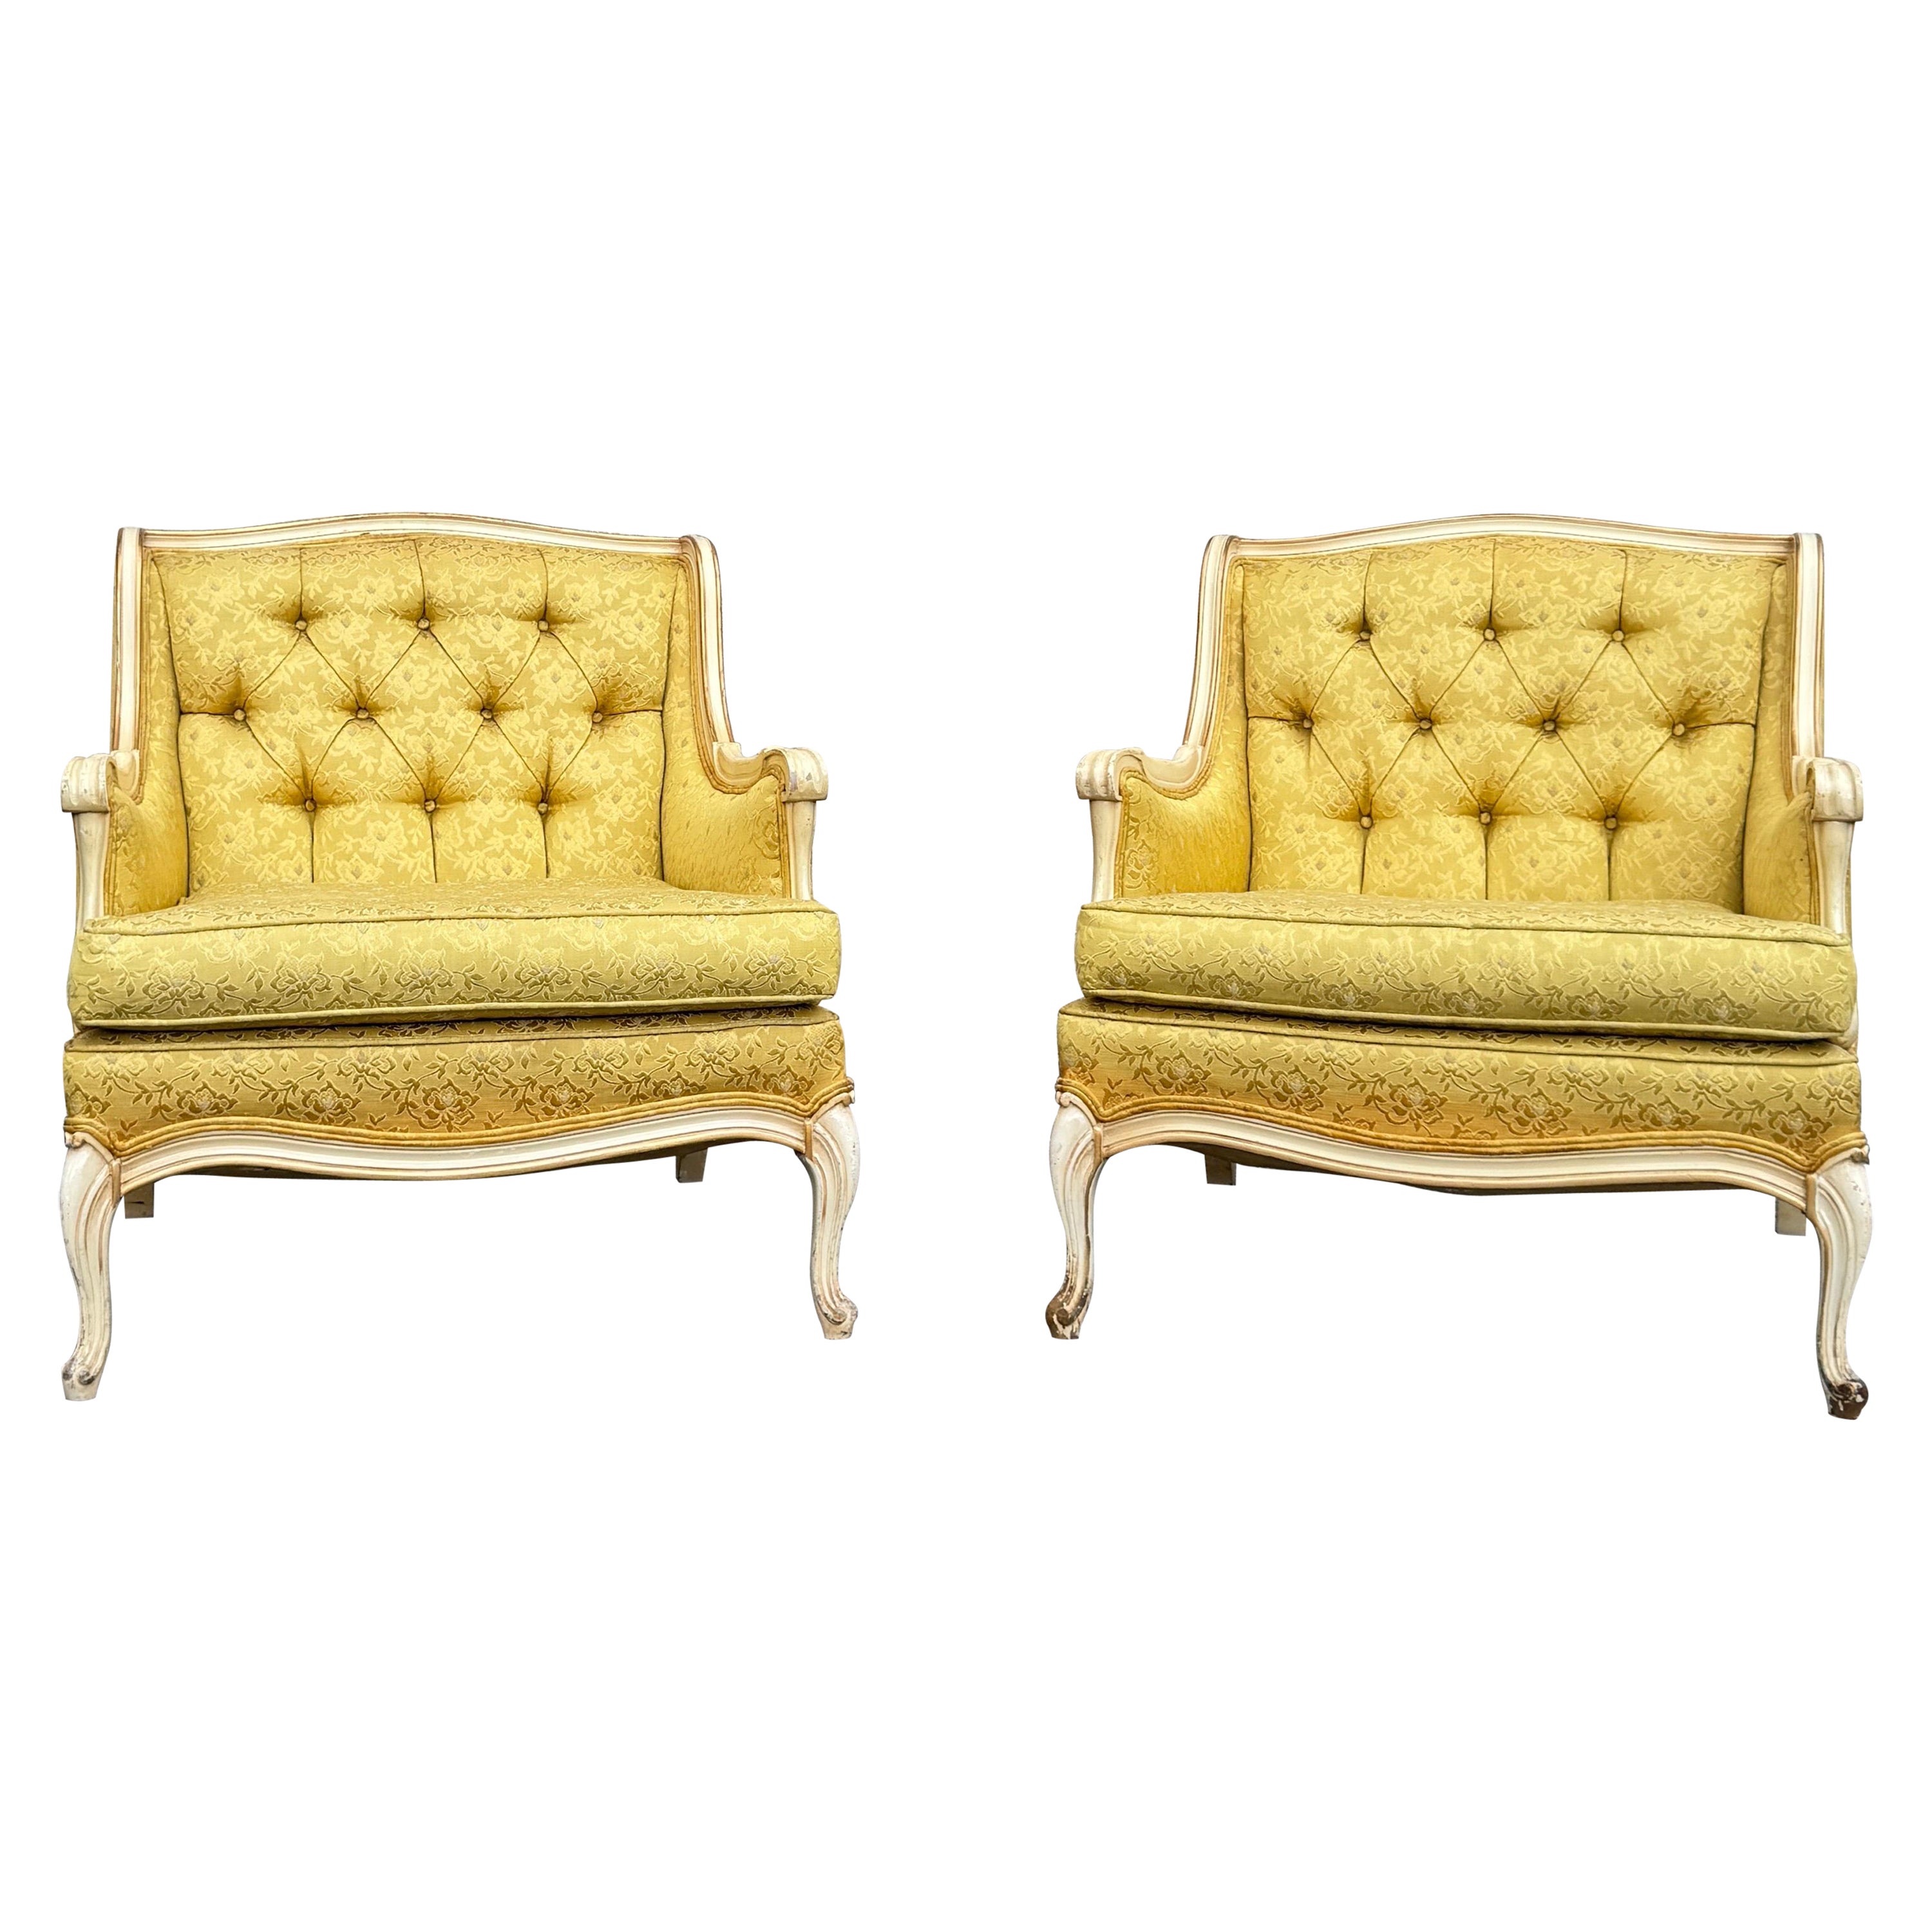 1950s French Bergere Wing Armchairs - a Pair